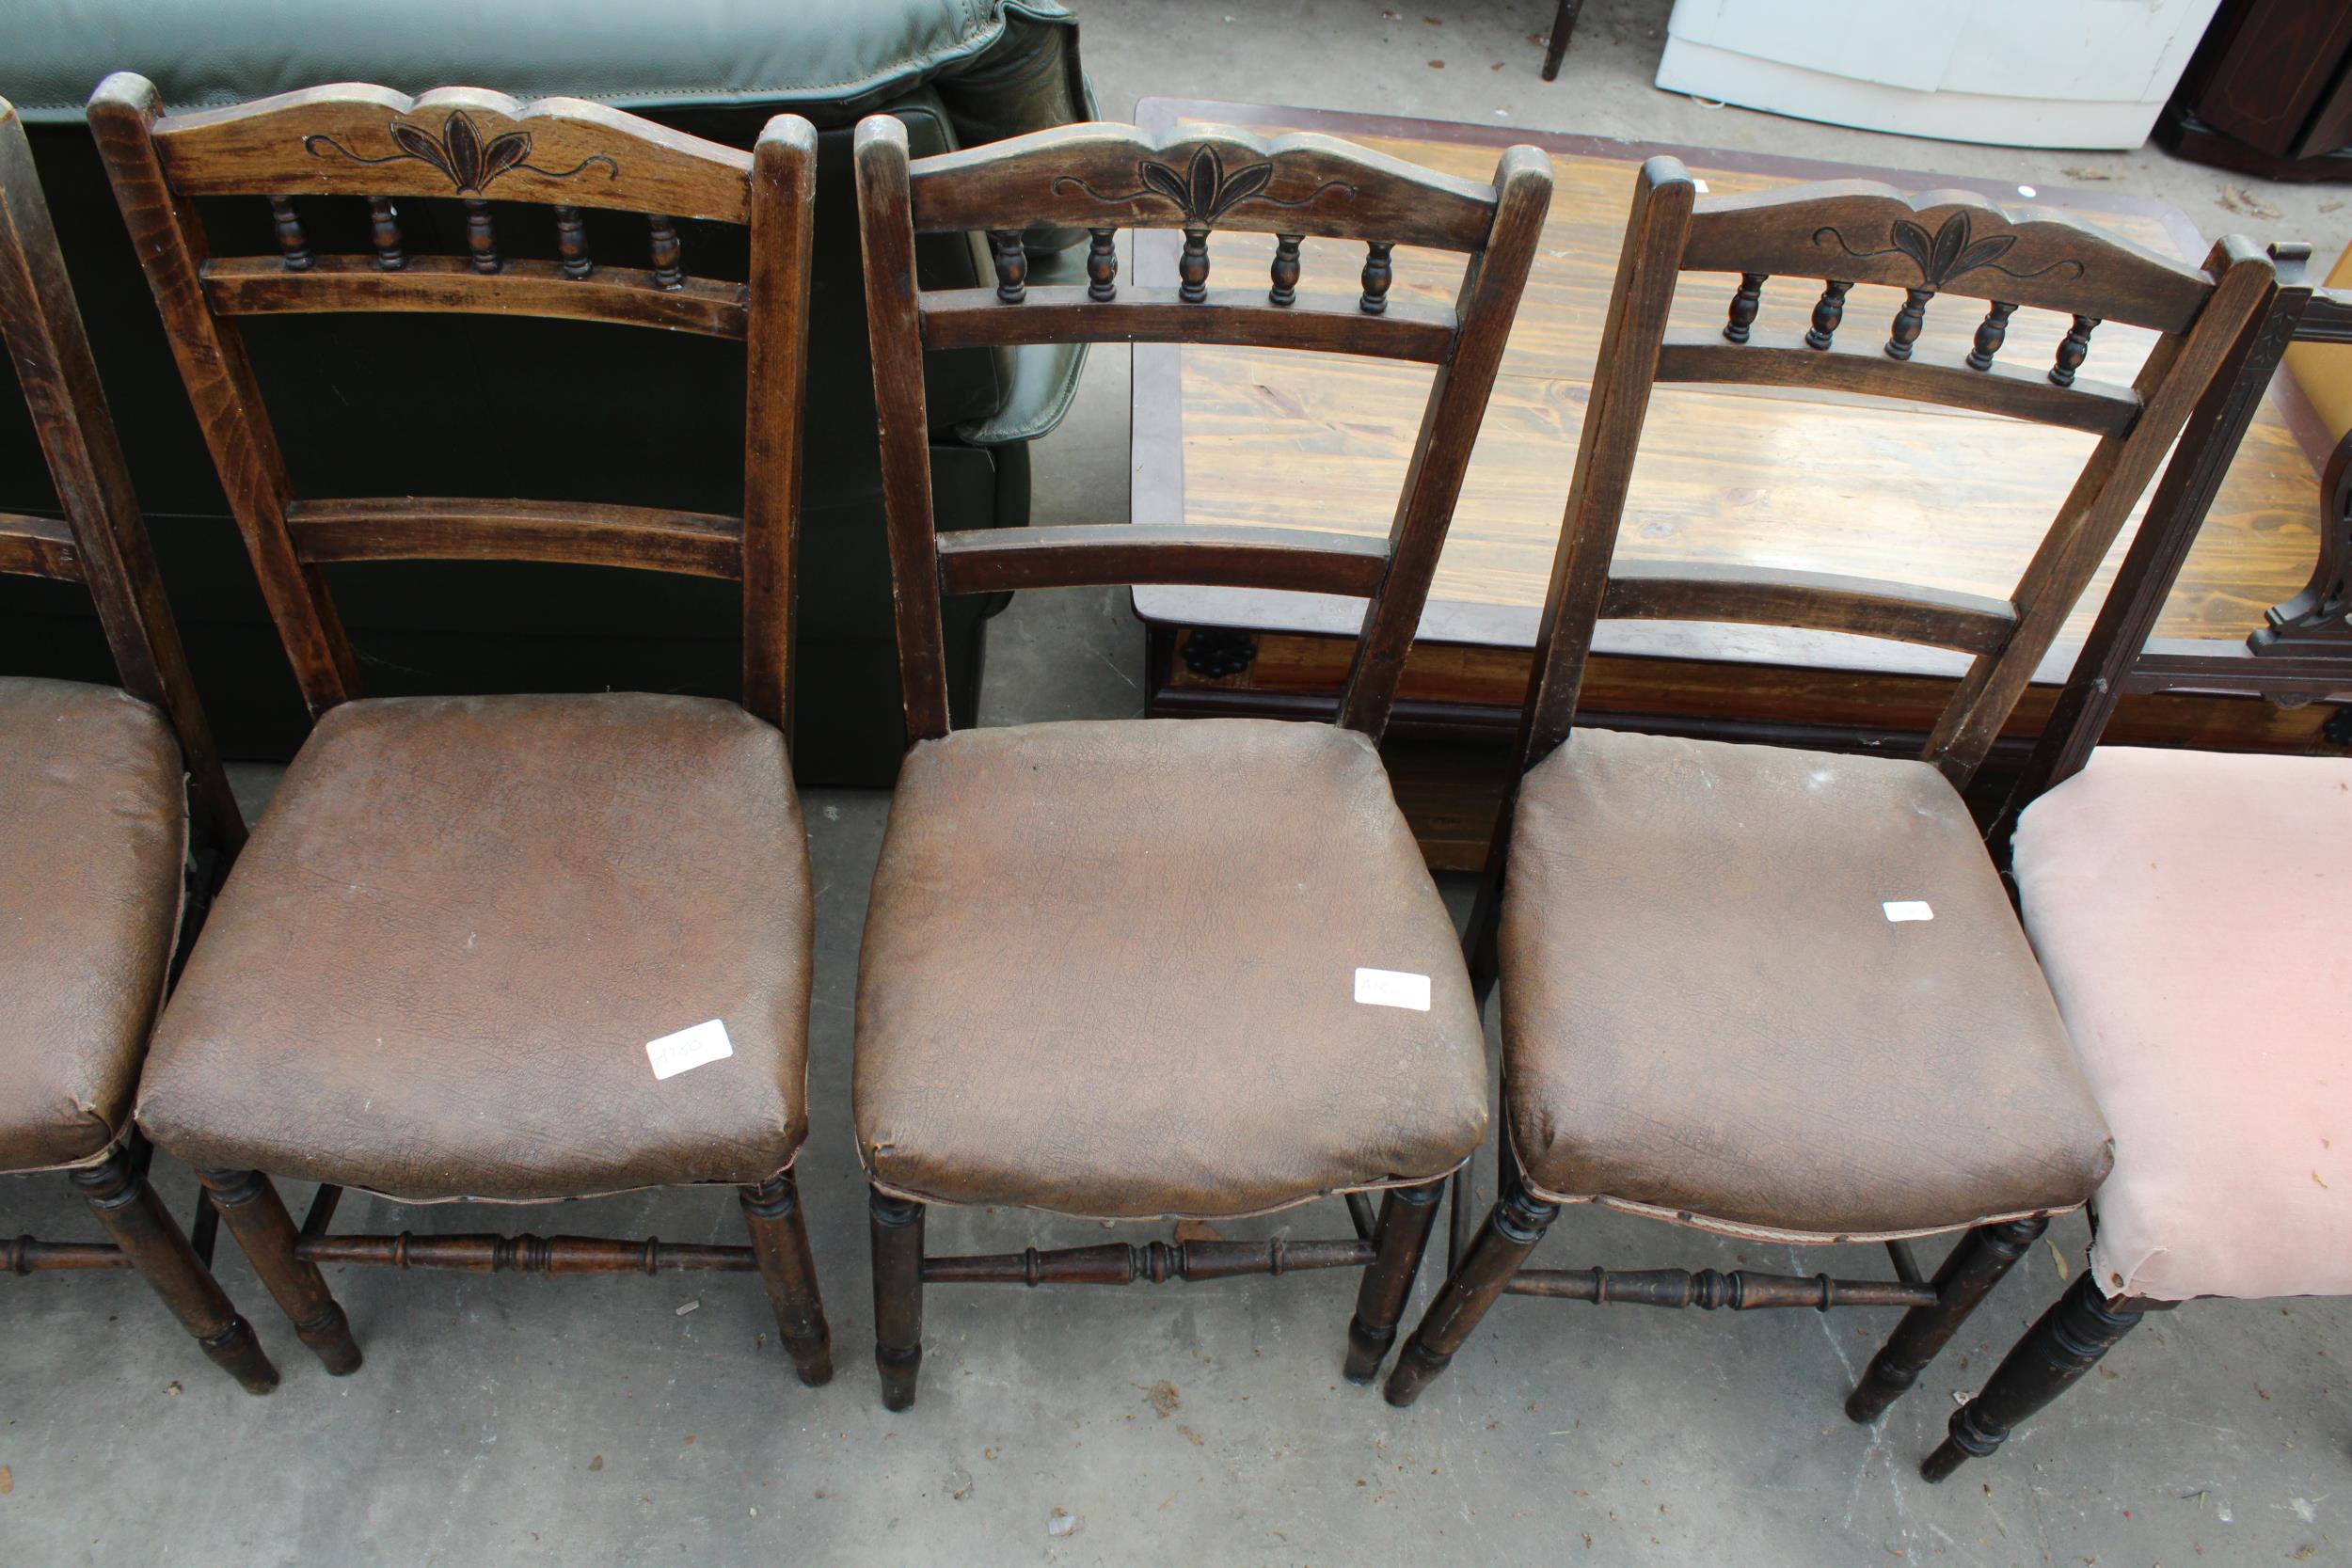 FOUR EDWARDIAN BEECH BEDROOM CHAIRS, A SINGLE BEDROOM CHAIR, AN EARLY 20TH CENTURY OAK DINING CHAIR, - Image 3 of 3